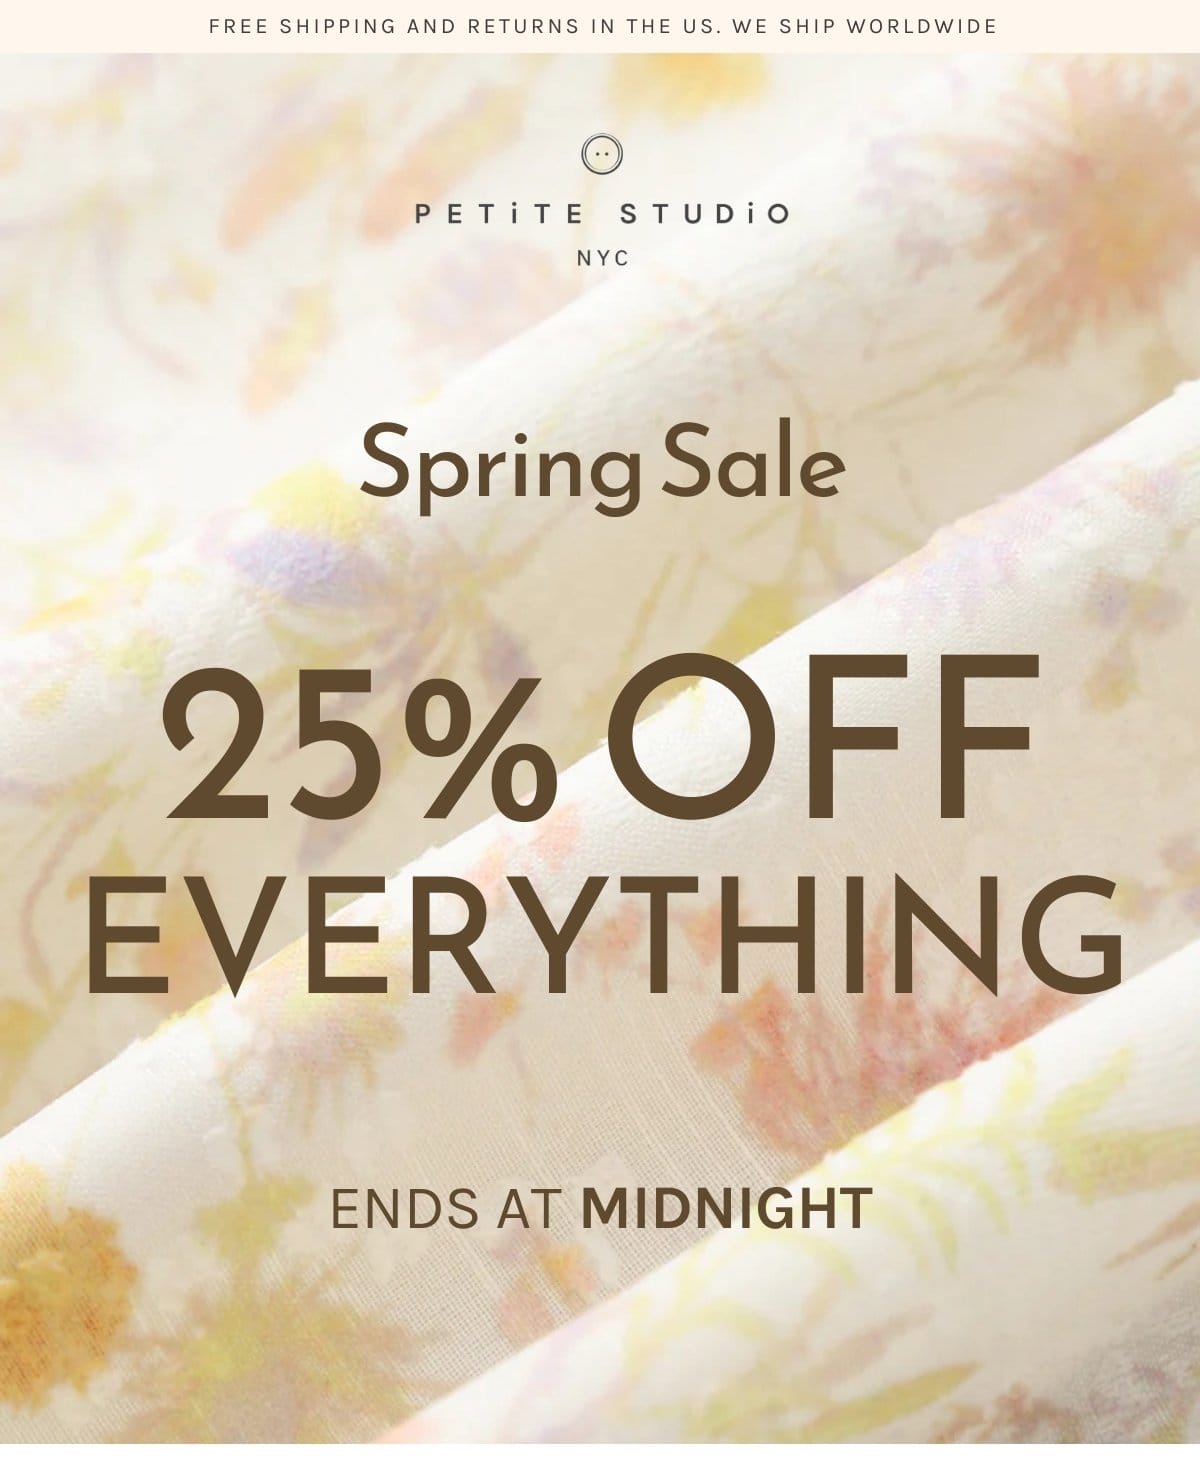 Last Chance Alert. Don't miss out on final savings! Shop now and enjoy 25% off before the sale ends.